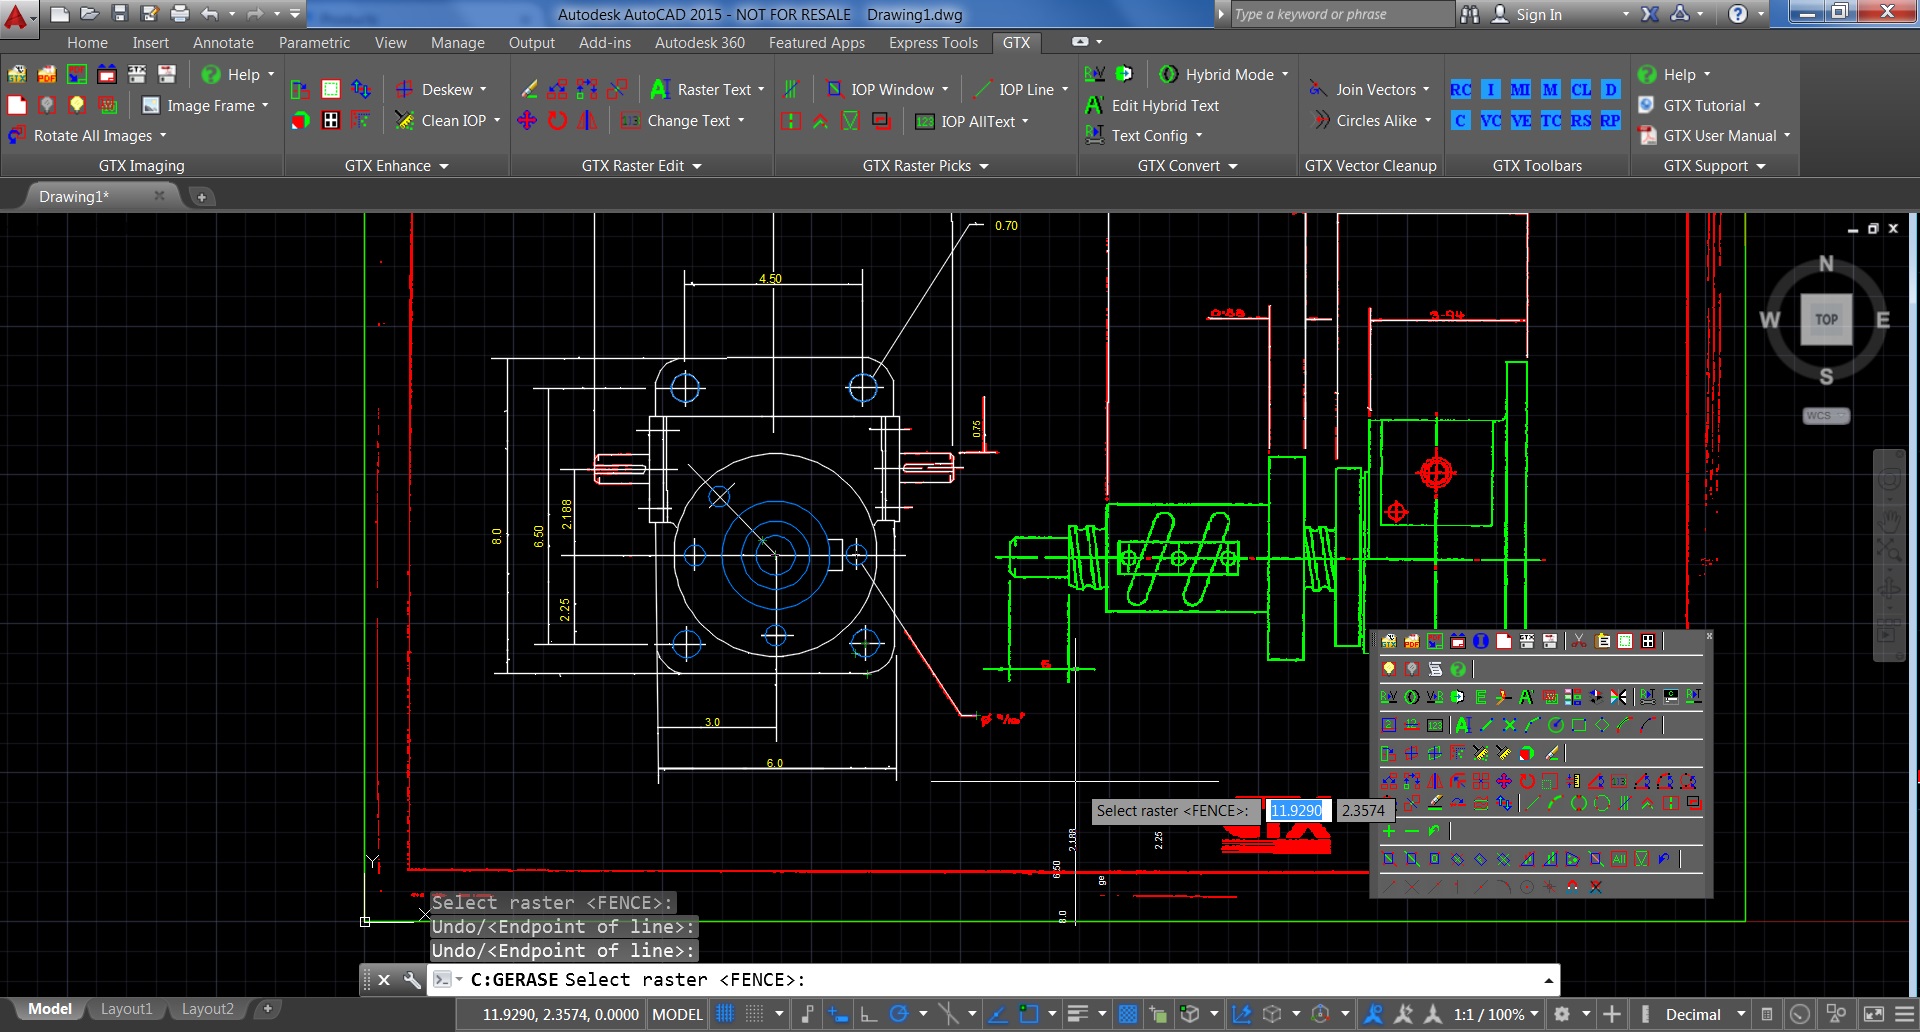 autocad 2015 download full version with crack 64 bit